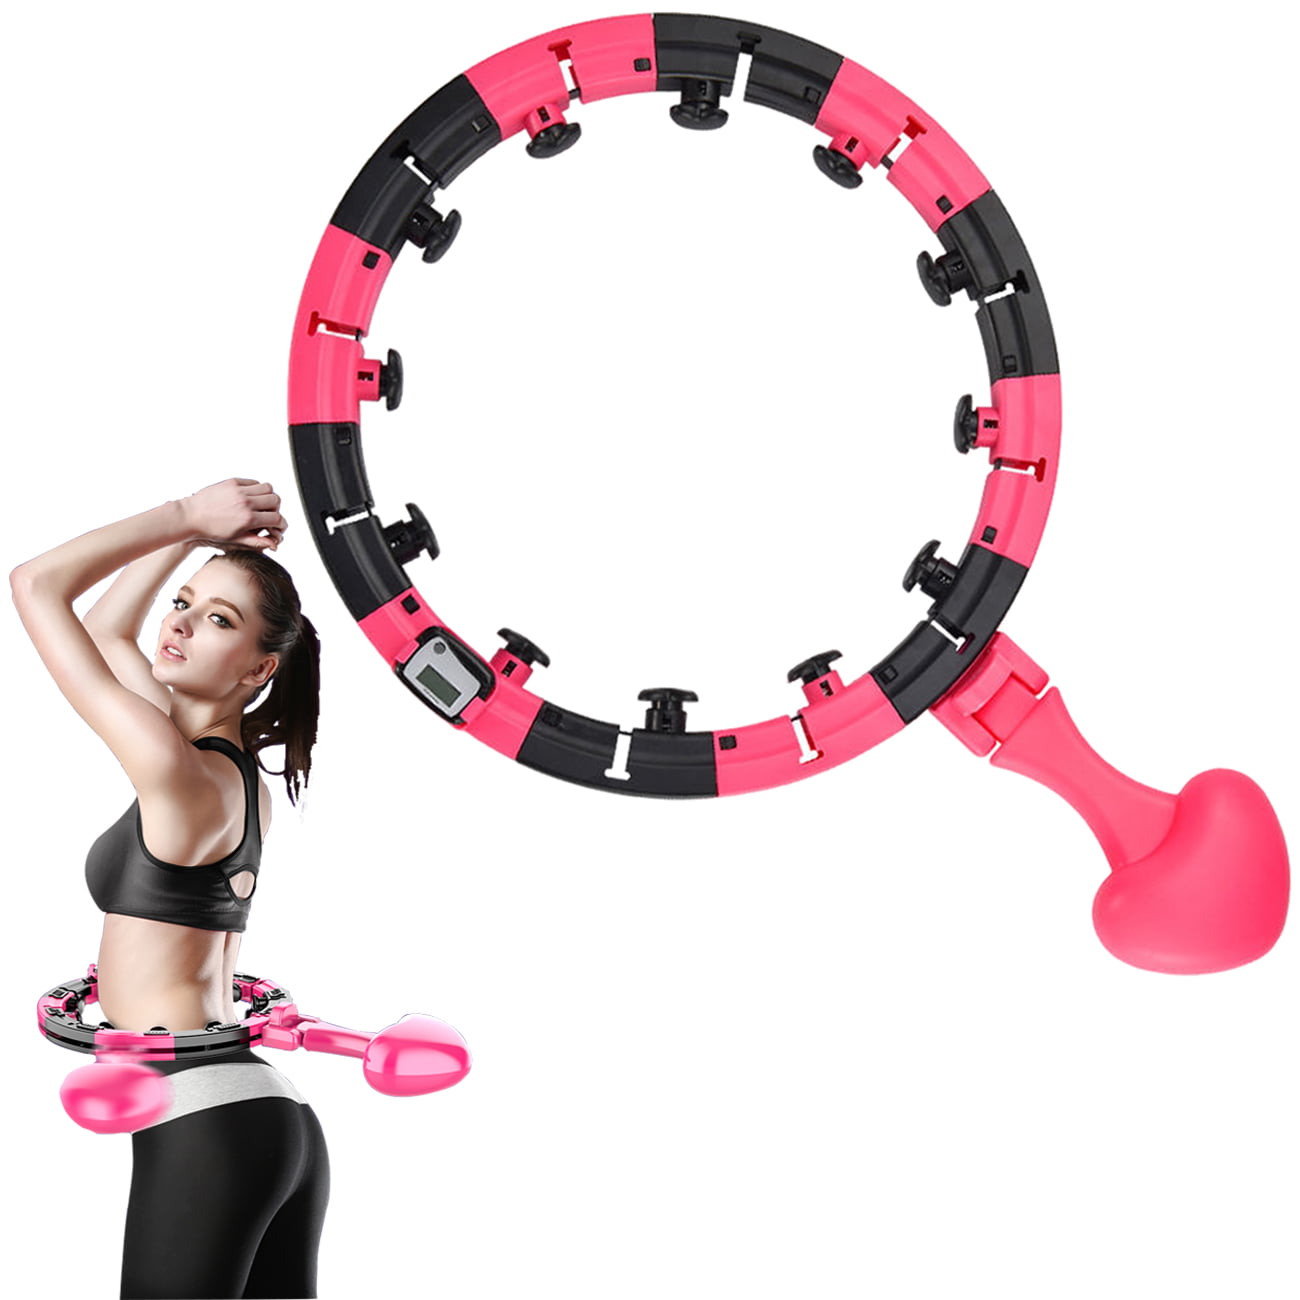 Fitness Ring for Adults 24 Knots Detachable All-Round Thin 360 Degree Body Hula Circle Smart Adjustable Hula Hoops with Massage Nut for Weight Loss Adjustable Size Hoola Hoops 2-in-1 Fitness BU 